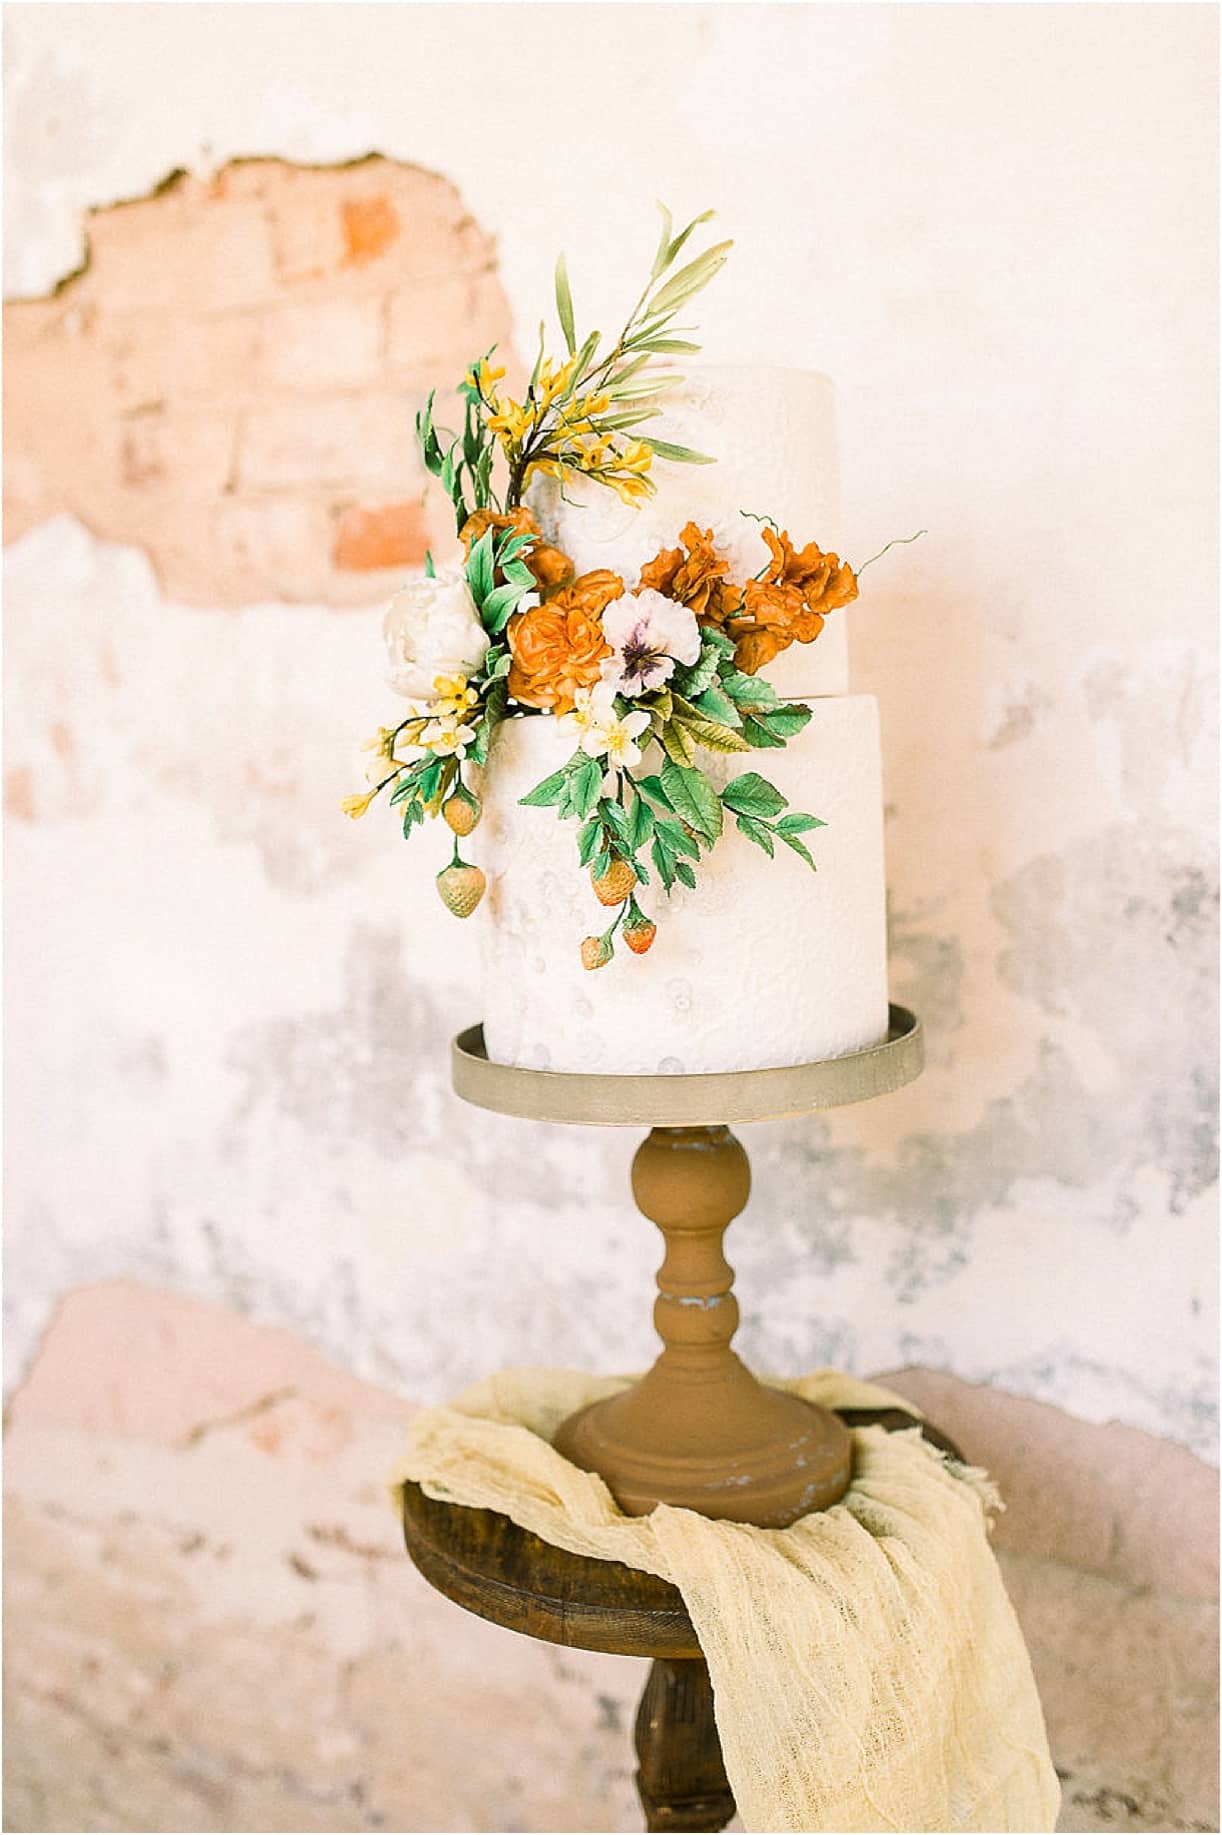 Autumnal Styled Shoot with Unique Spring Wedding Colors | Hill City Bride Virginia Wedding Blog Reception Flowers Cake Floral Orange Peach Blue Green White